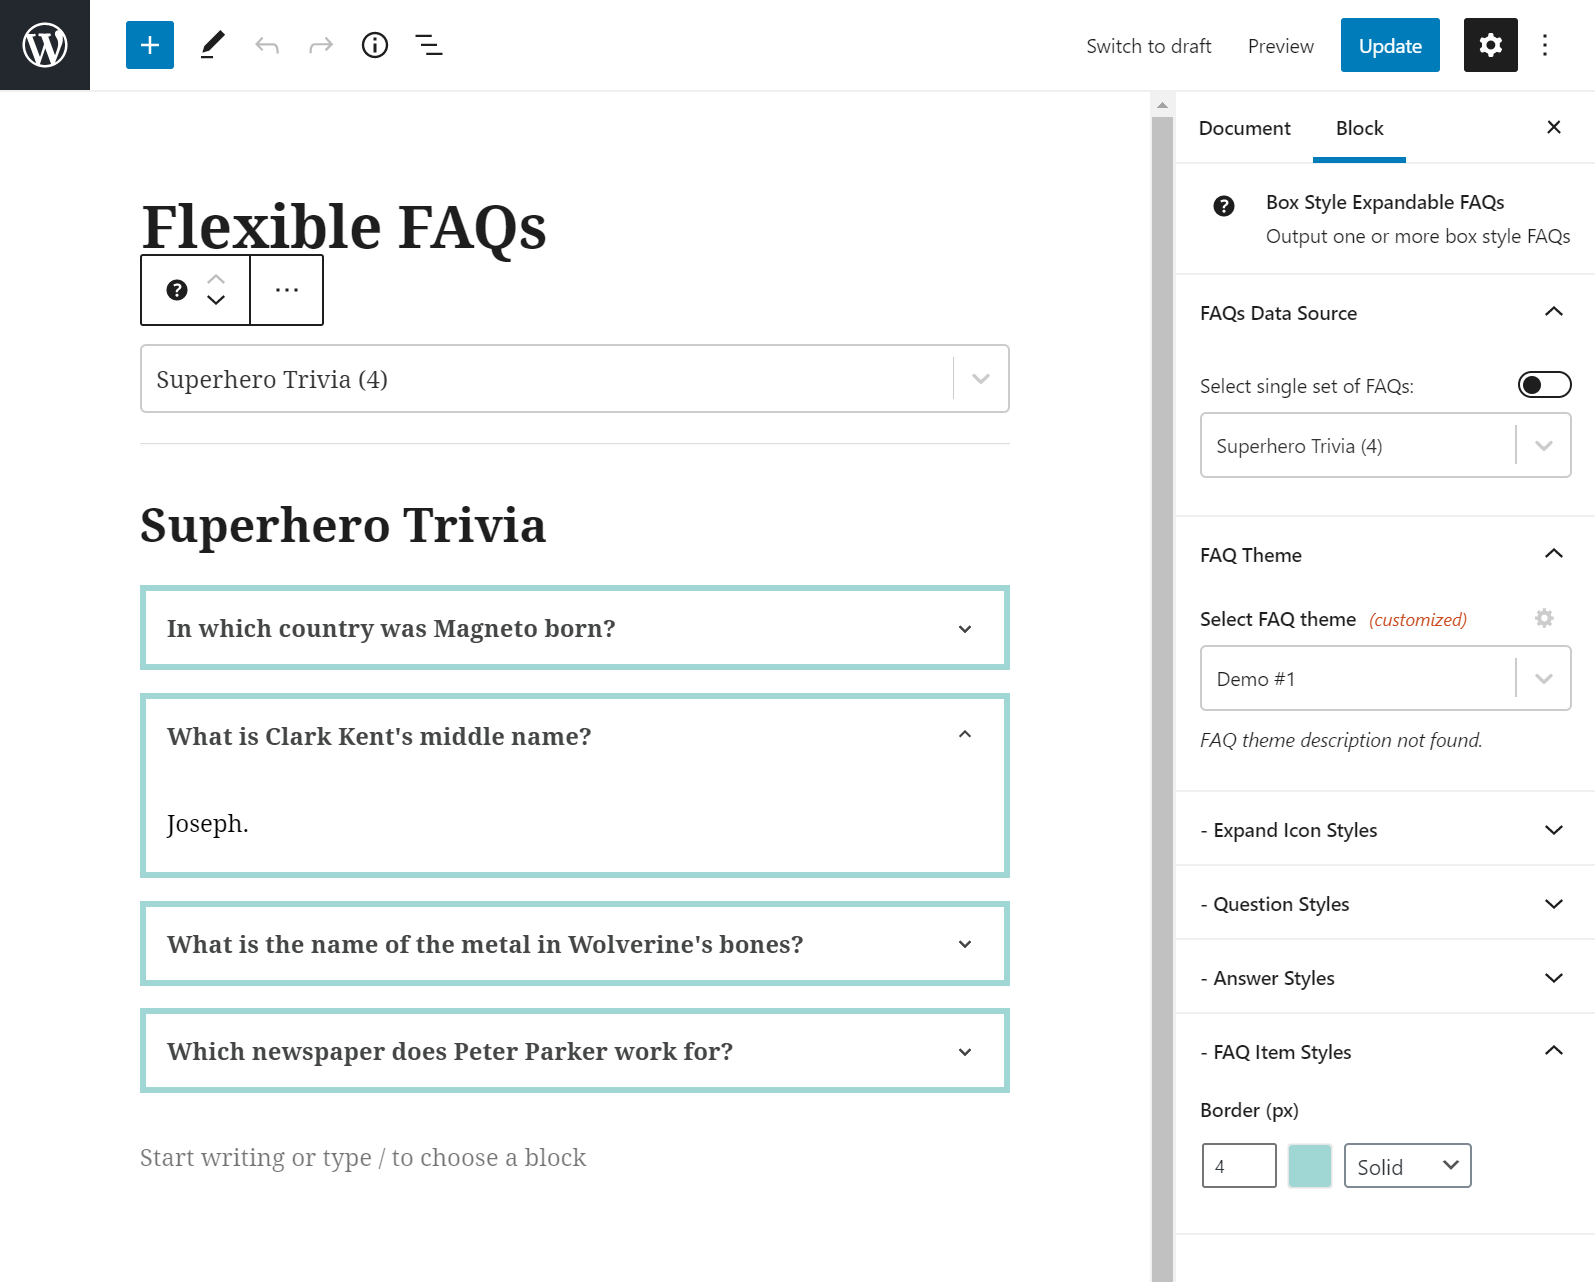 Add FAQs to the editor and preview them in real-time. Lot's of formatting options available.